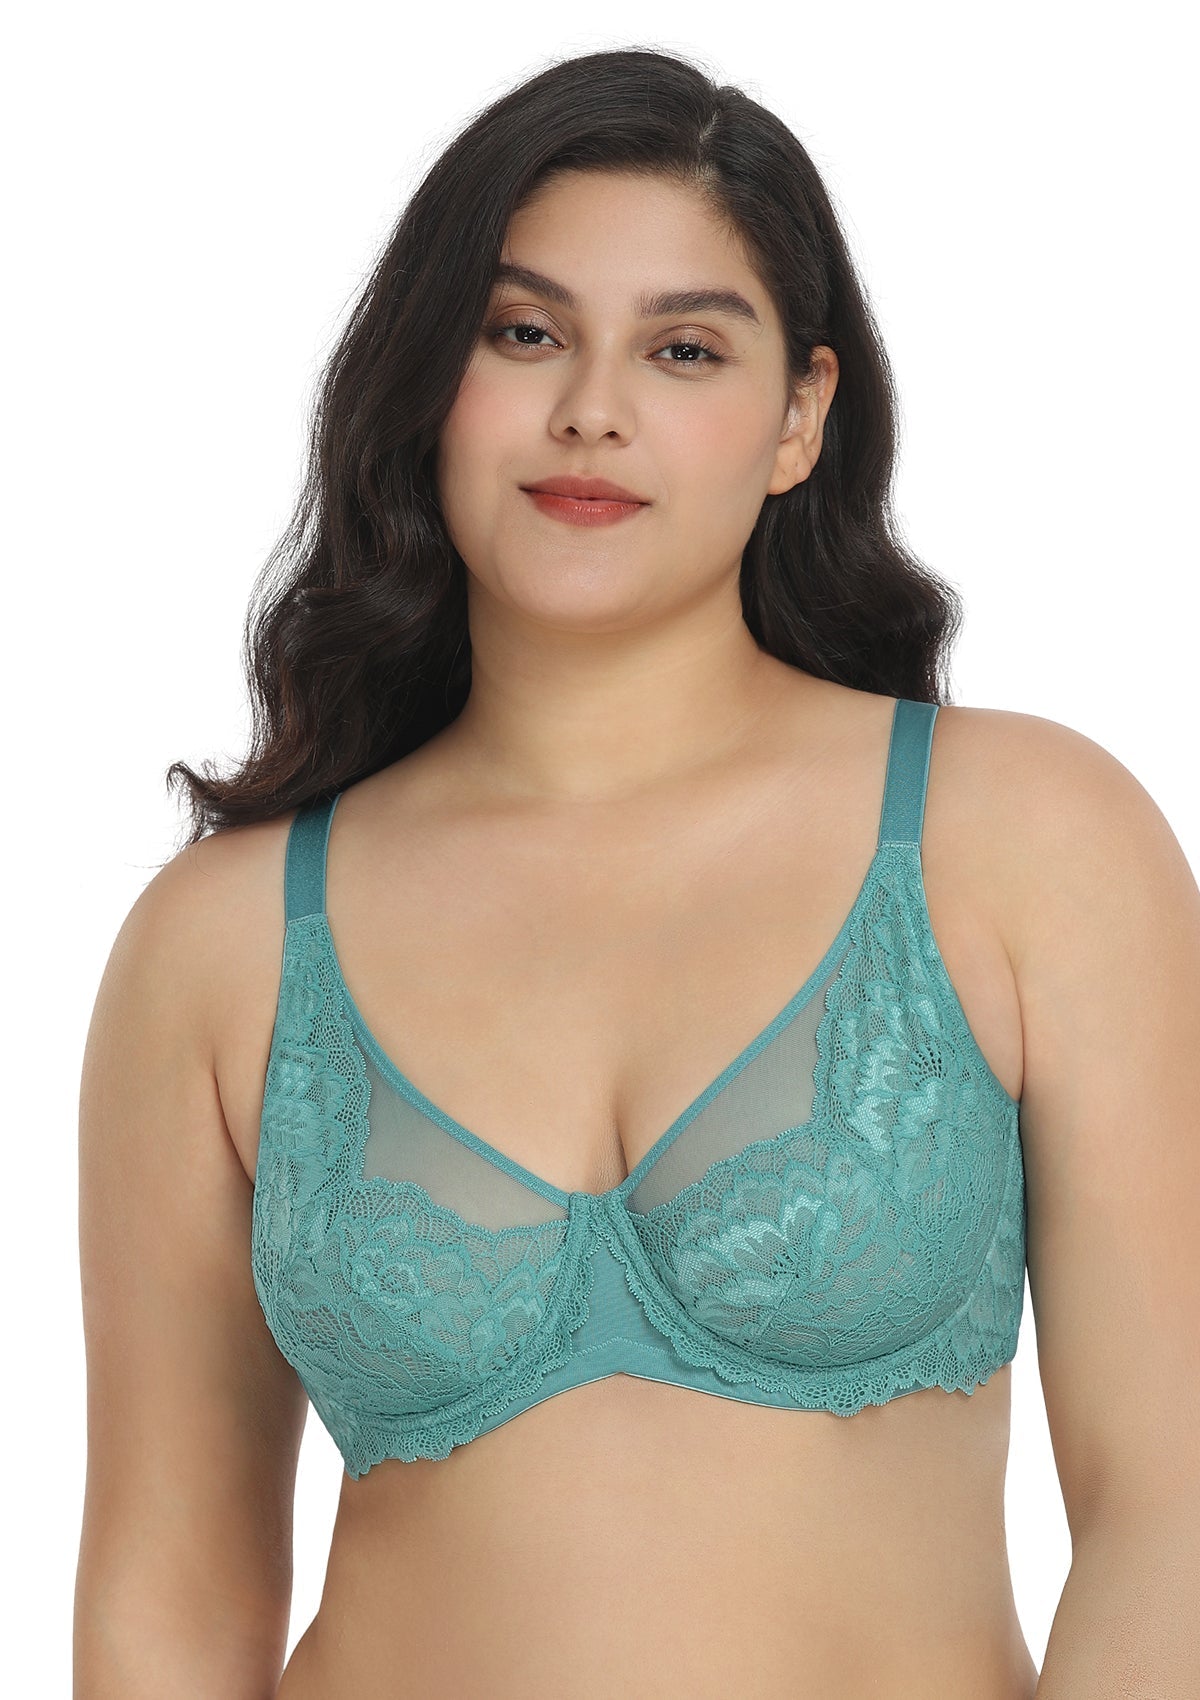 HSIA Paeonia Lace Full Coverage Underwire Non-Padded Uplifting Bra - Light Coral / 40 / DDD/F